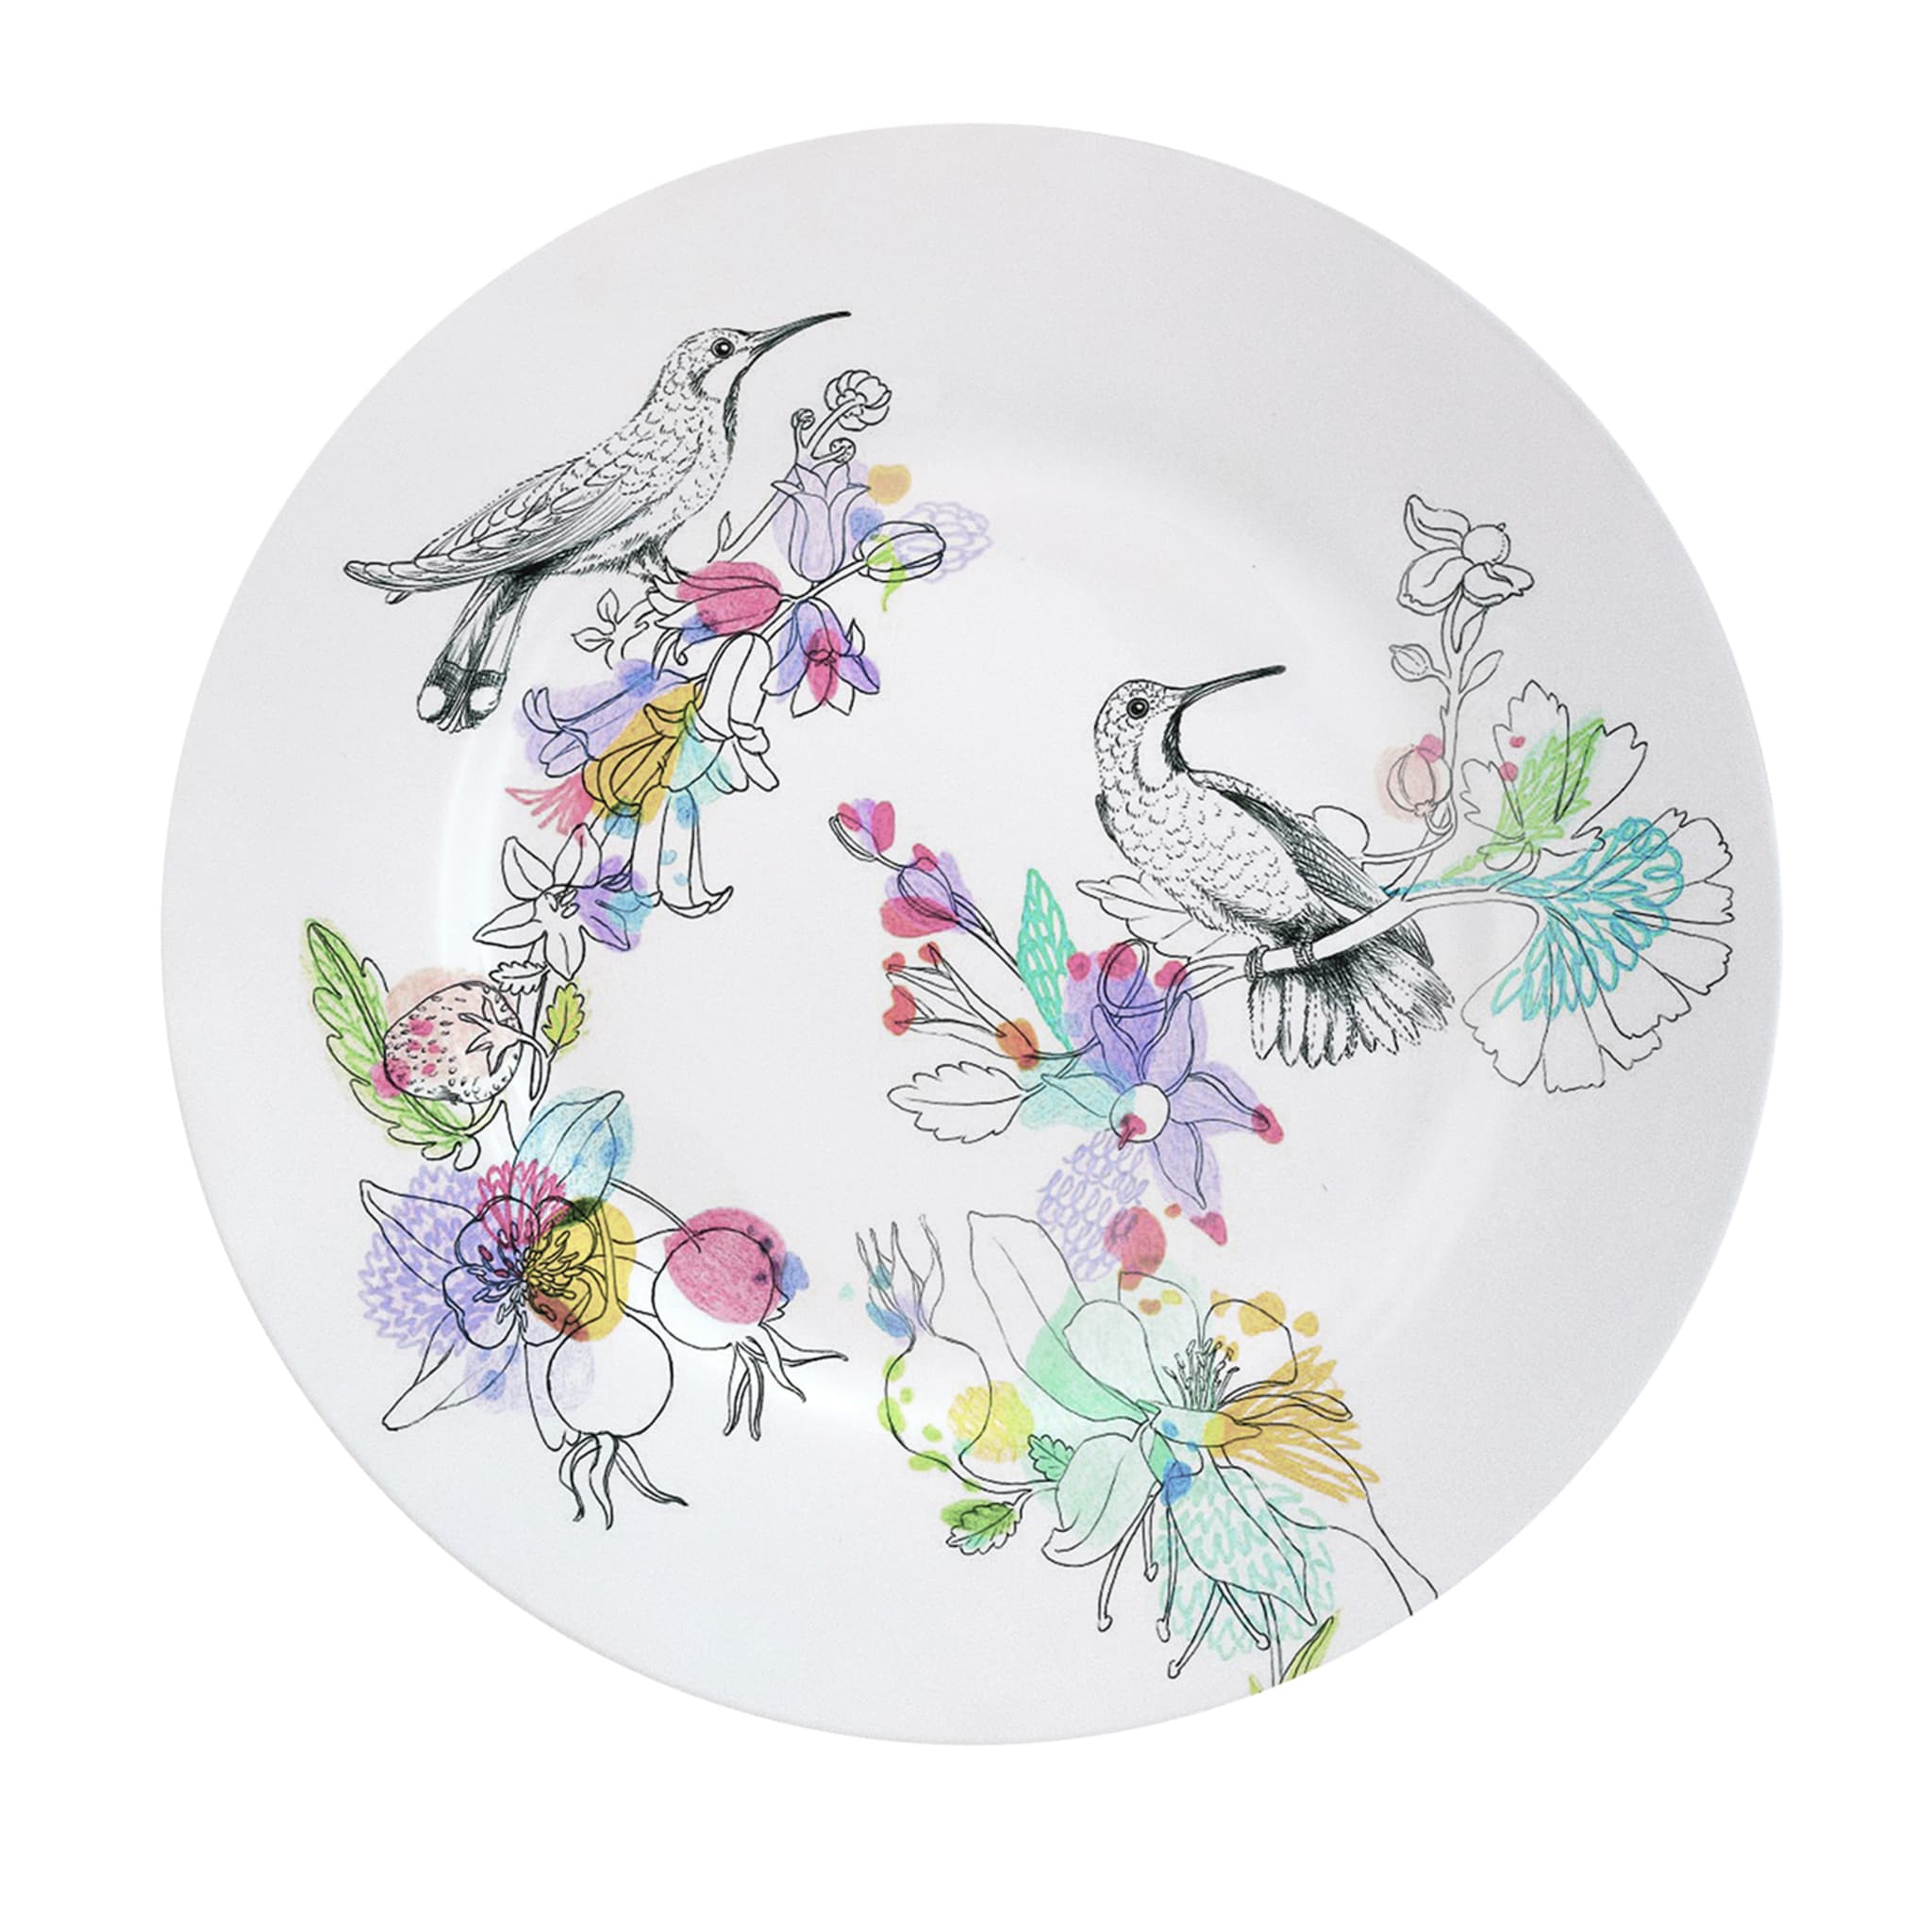 An Ode To The Woods Hummingbird Dinner Plate - Main view